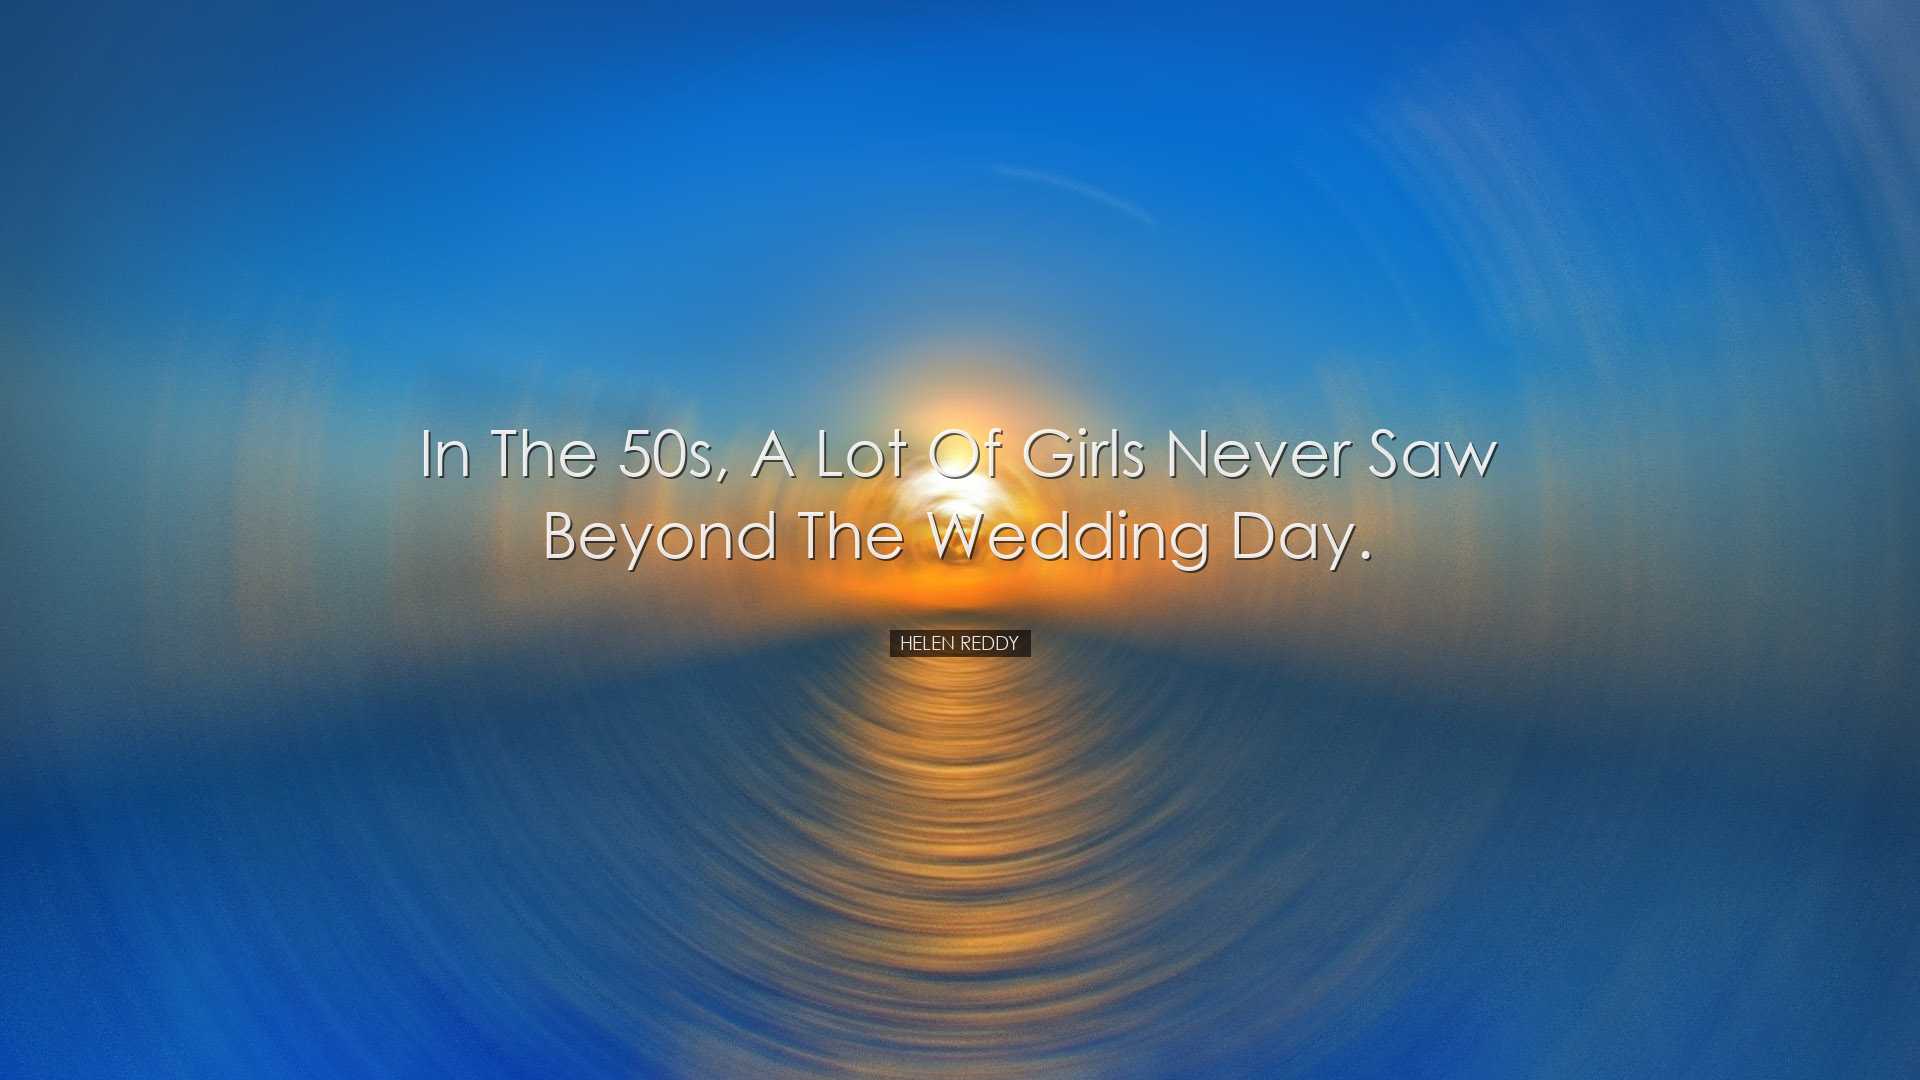 In the 50s, a lot of girls never saw beyond the wedding day. - Hel